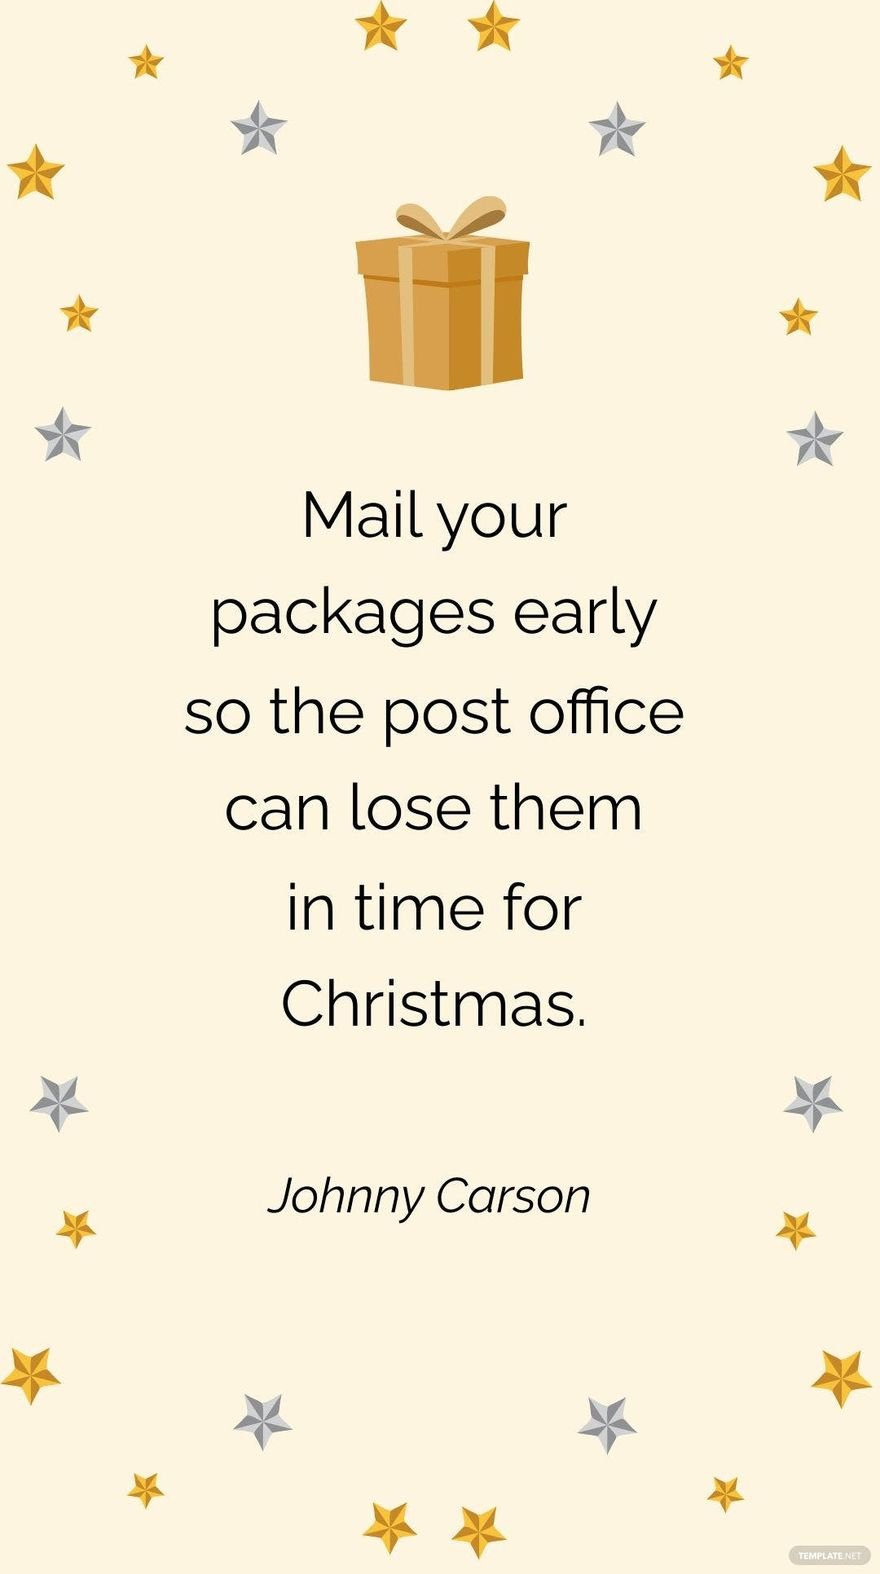 Free Johnny Carson - Mail your packages early so the post office can lose them in time for Christmas. in JPG